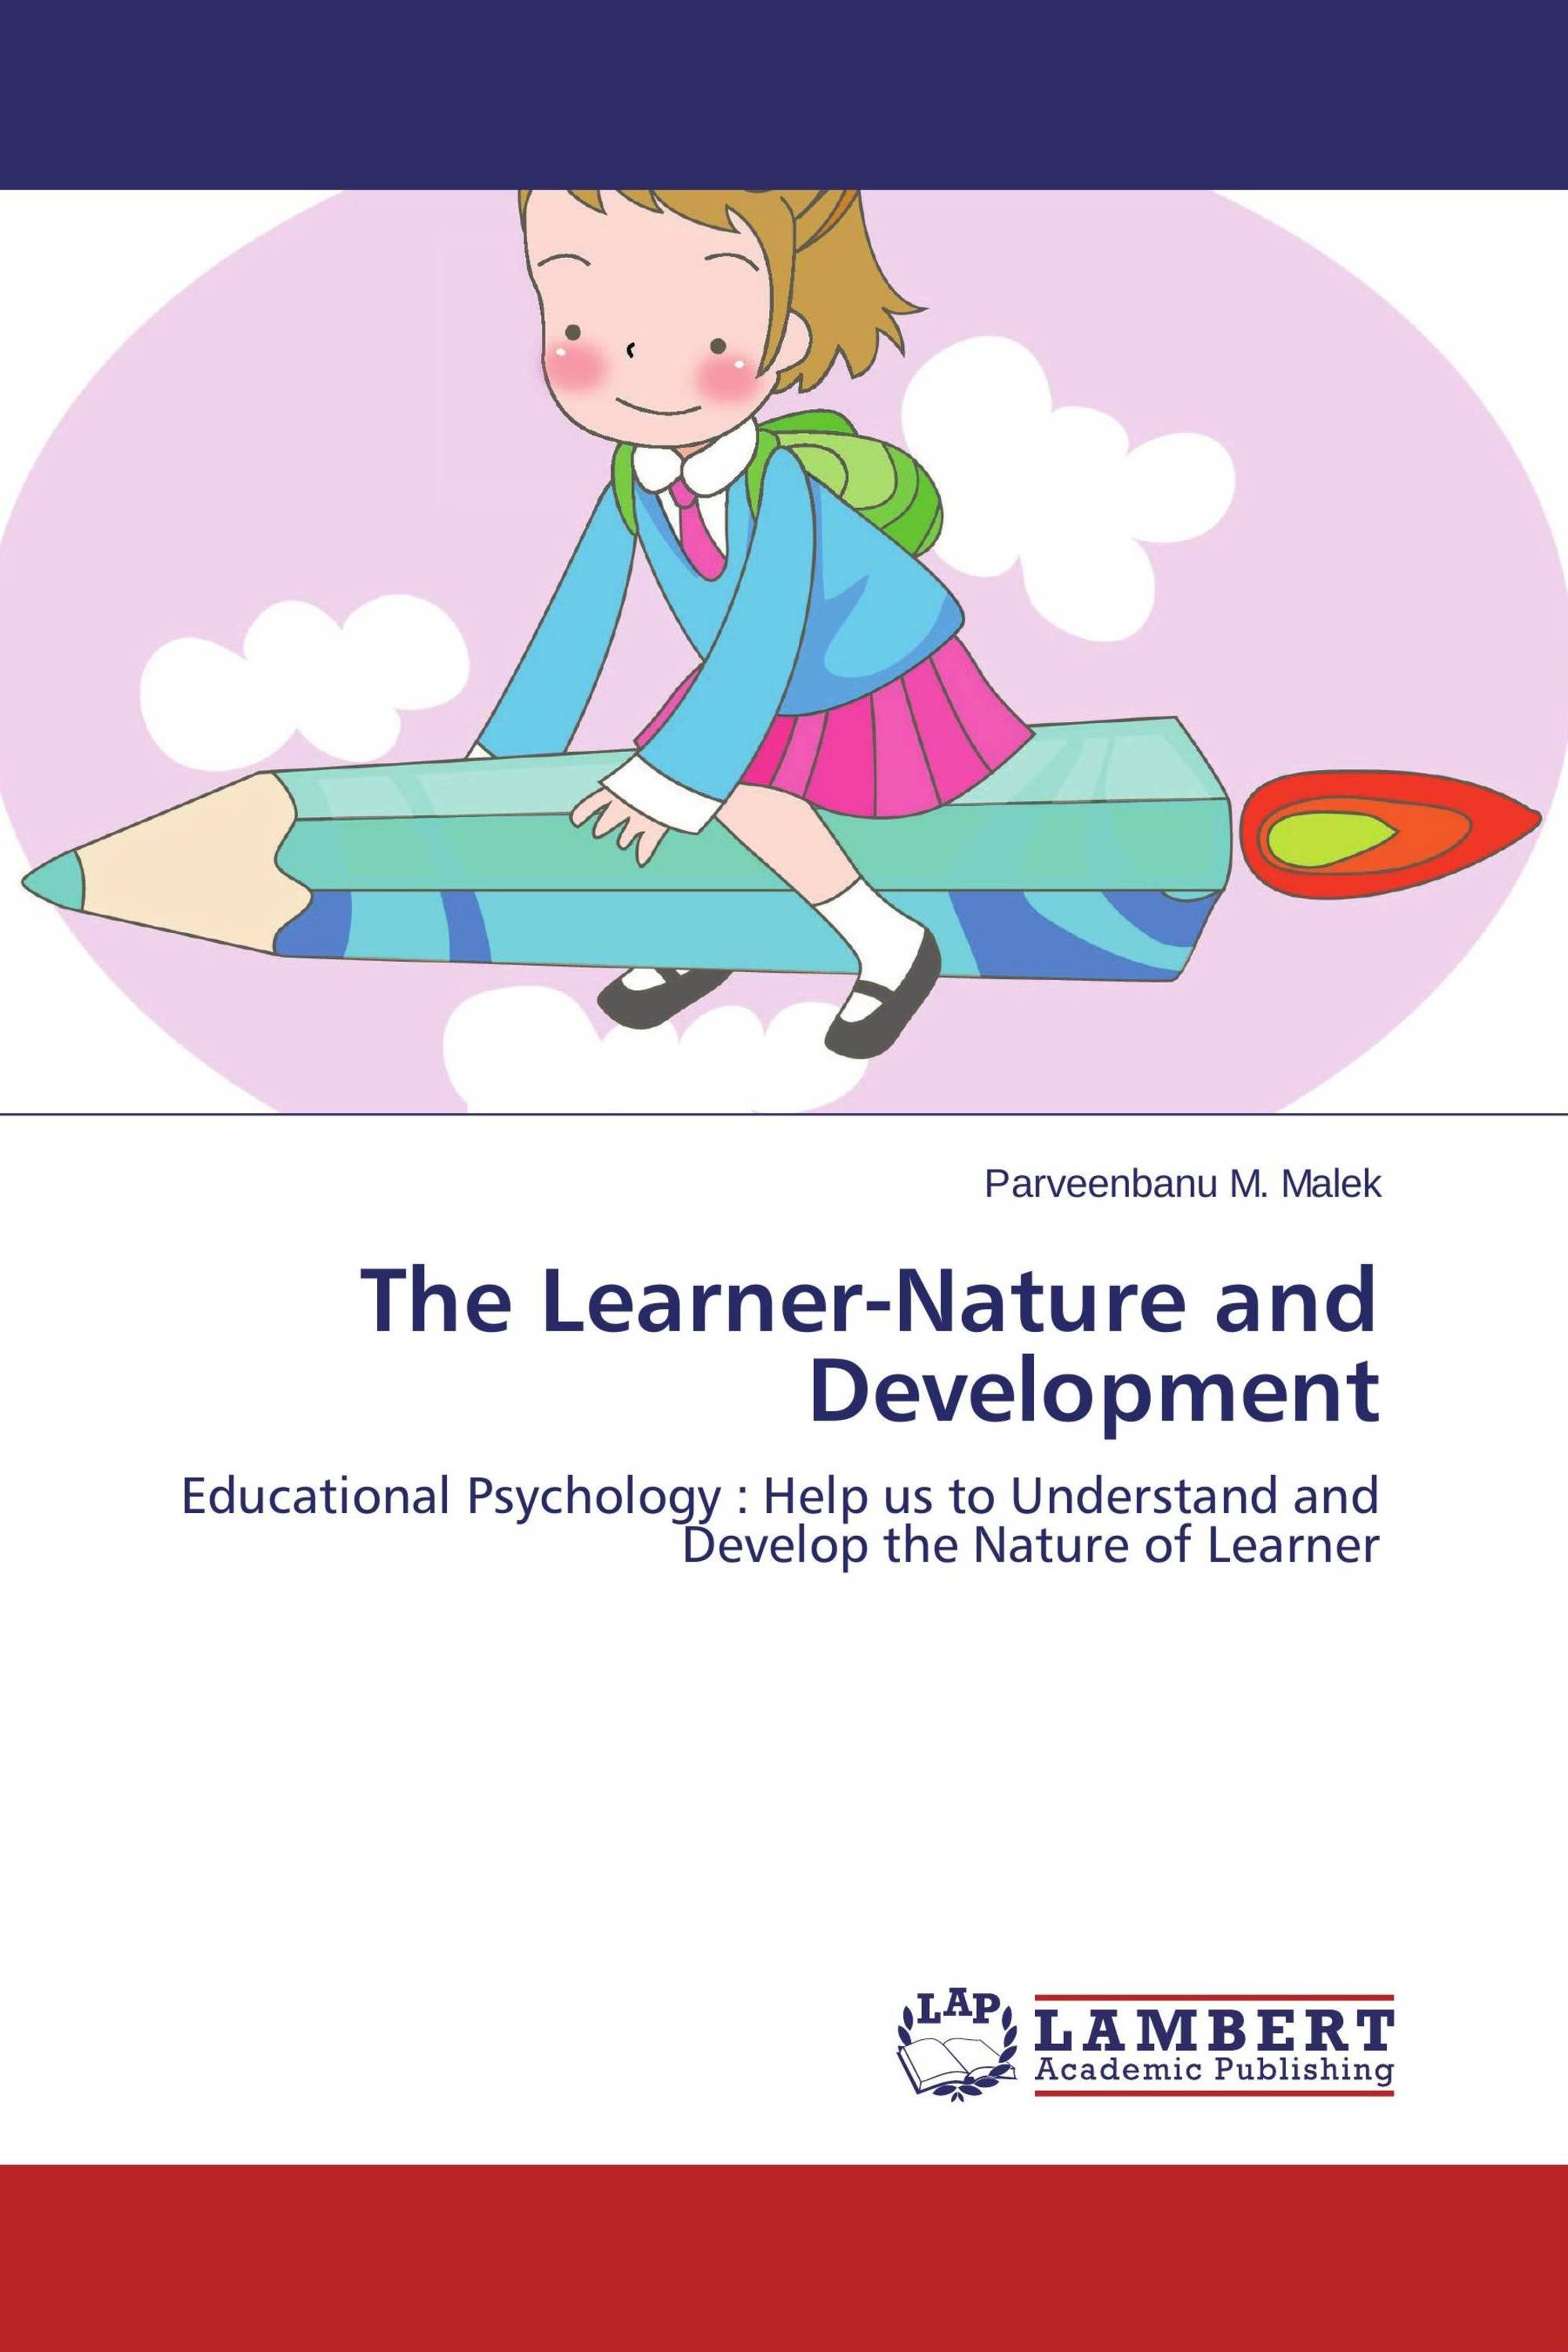 The Learner-Nature and Development